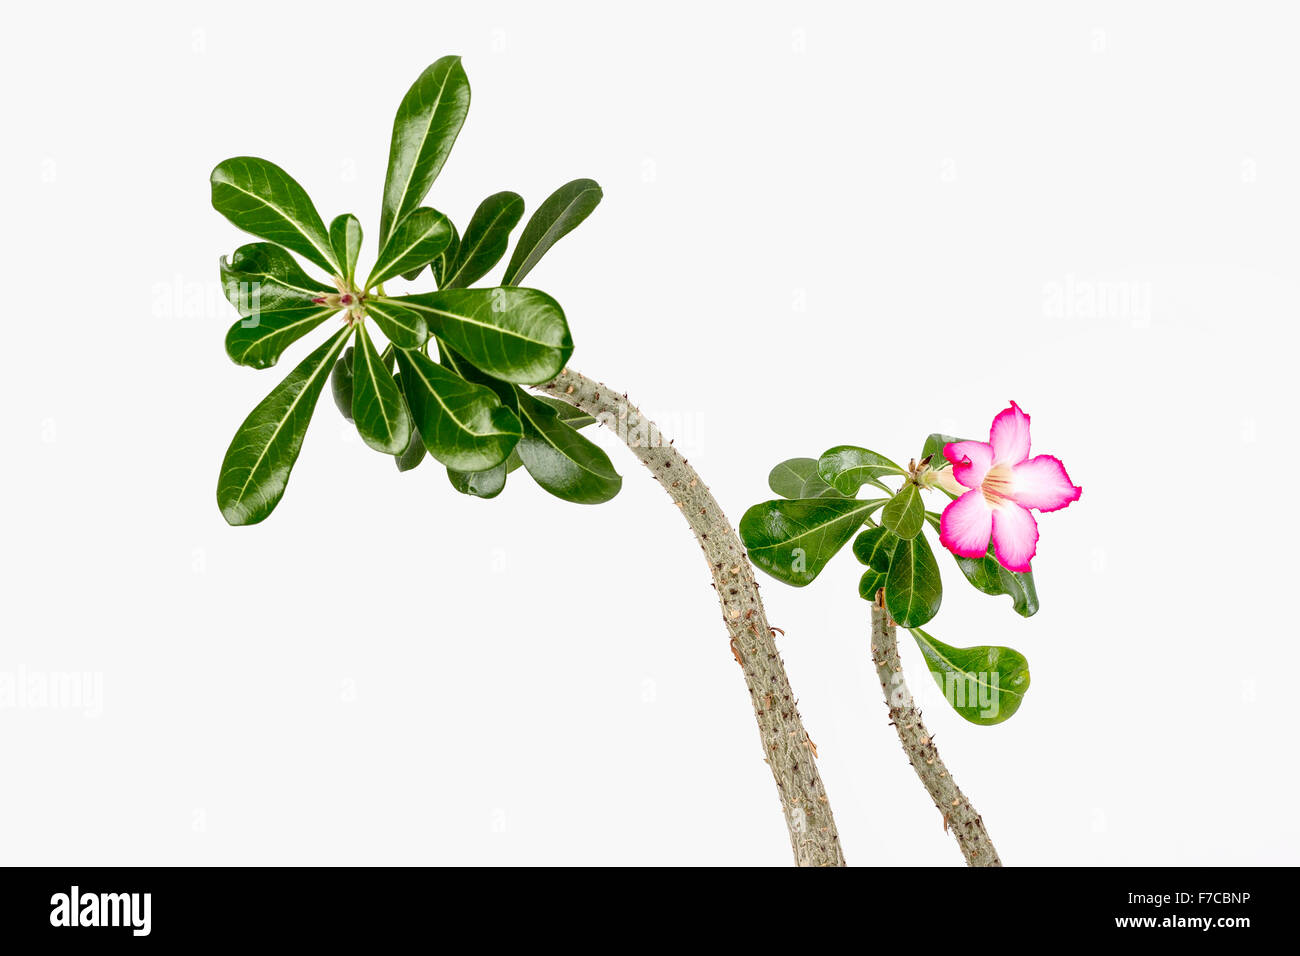 Adenium obesum green potted flowering plant species in the family Dogbane, Apocynaceae. Stock Photo